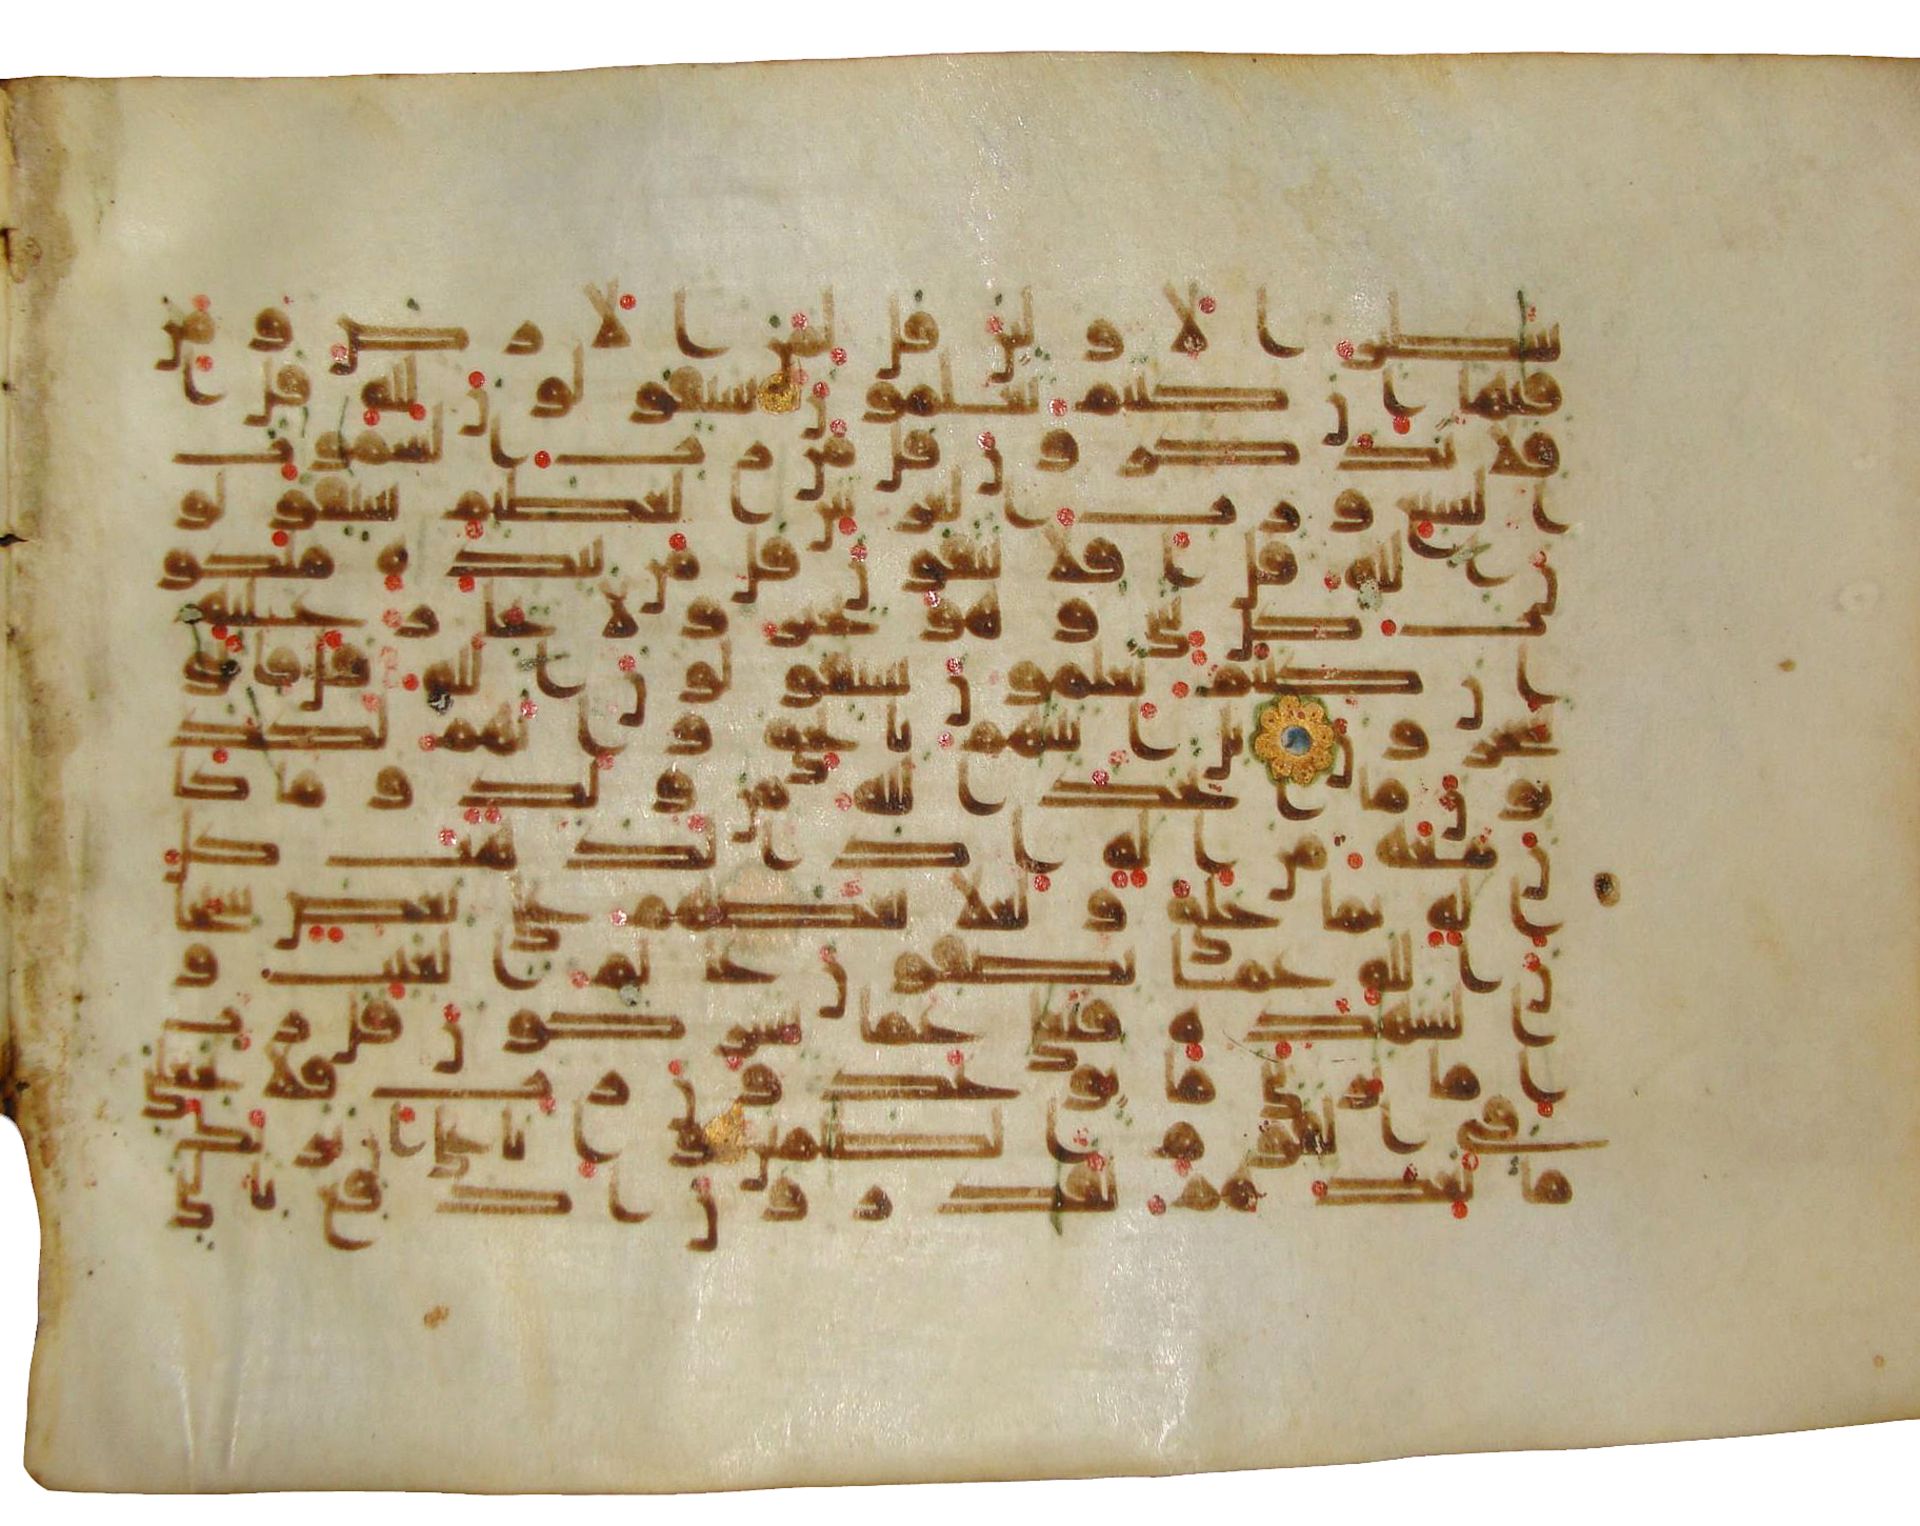 A QURAN FOLIO IN KUFIC SCRIPT ON VELLUM, NEAR EAST OR NORTH AFRICA, 9TH-10TH CENTURY - Image 2 of 2